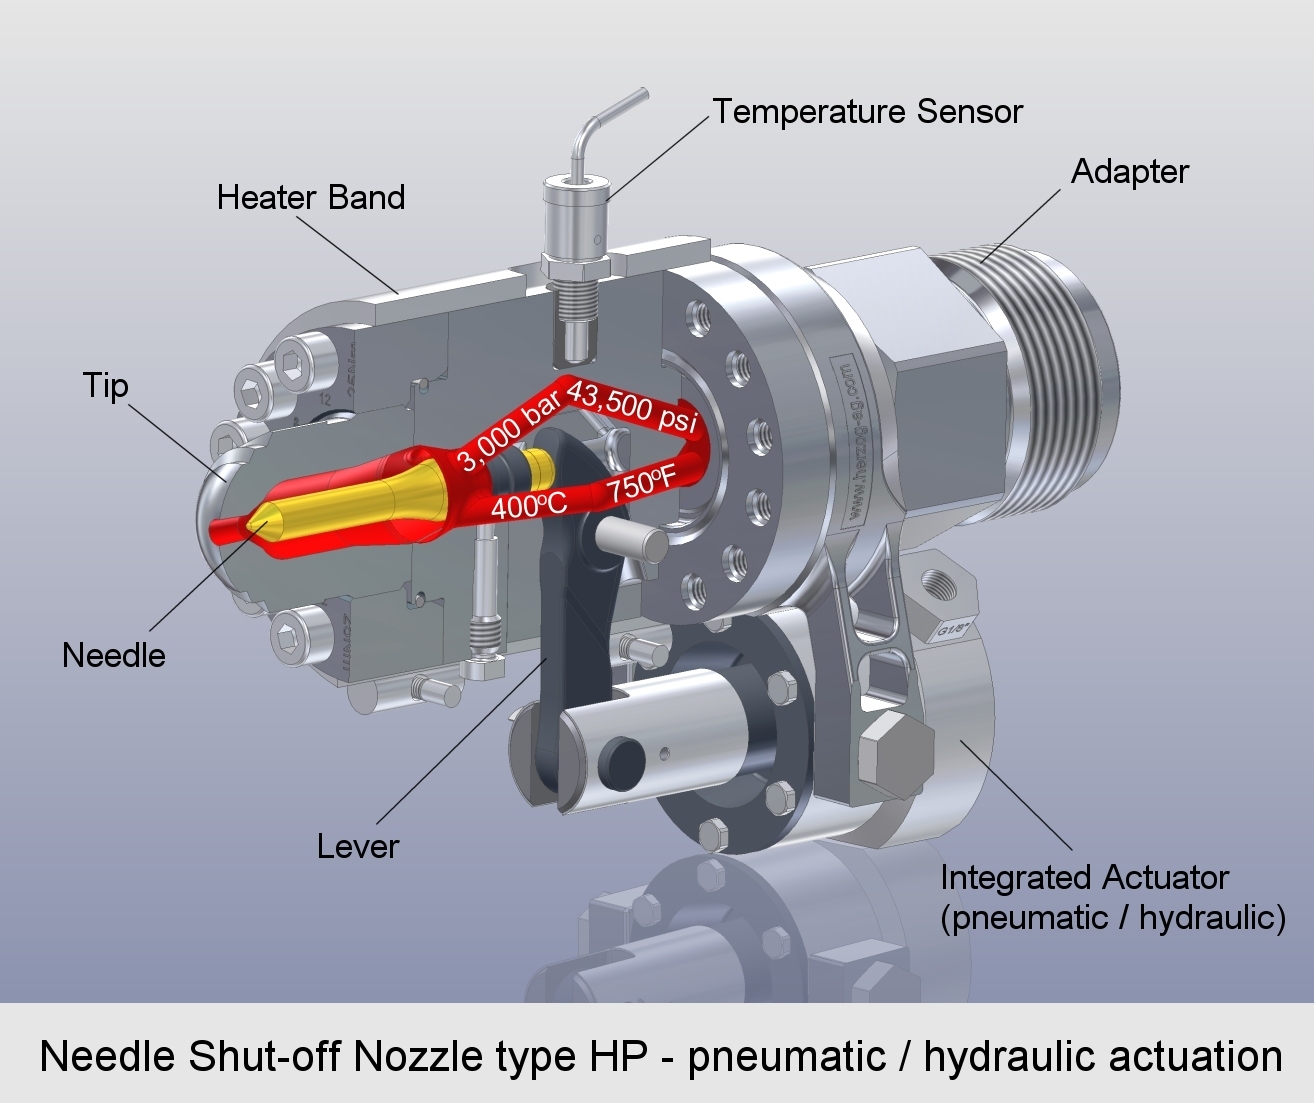 File:Needle Shut-off Nozzle type HP - pneumatic or hydraulic actuation  info.jpg - Wikipedia